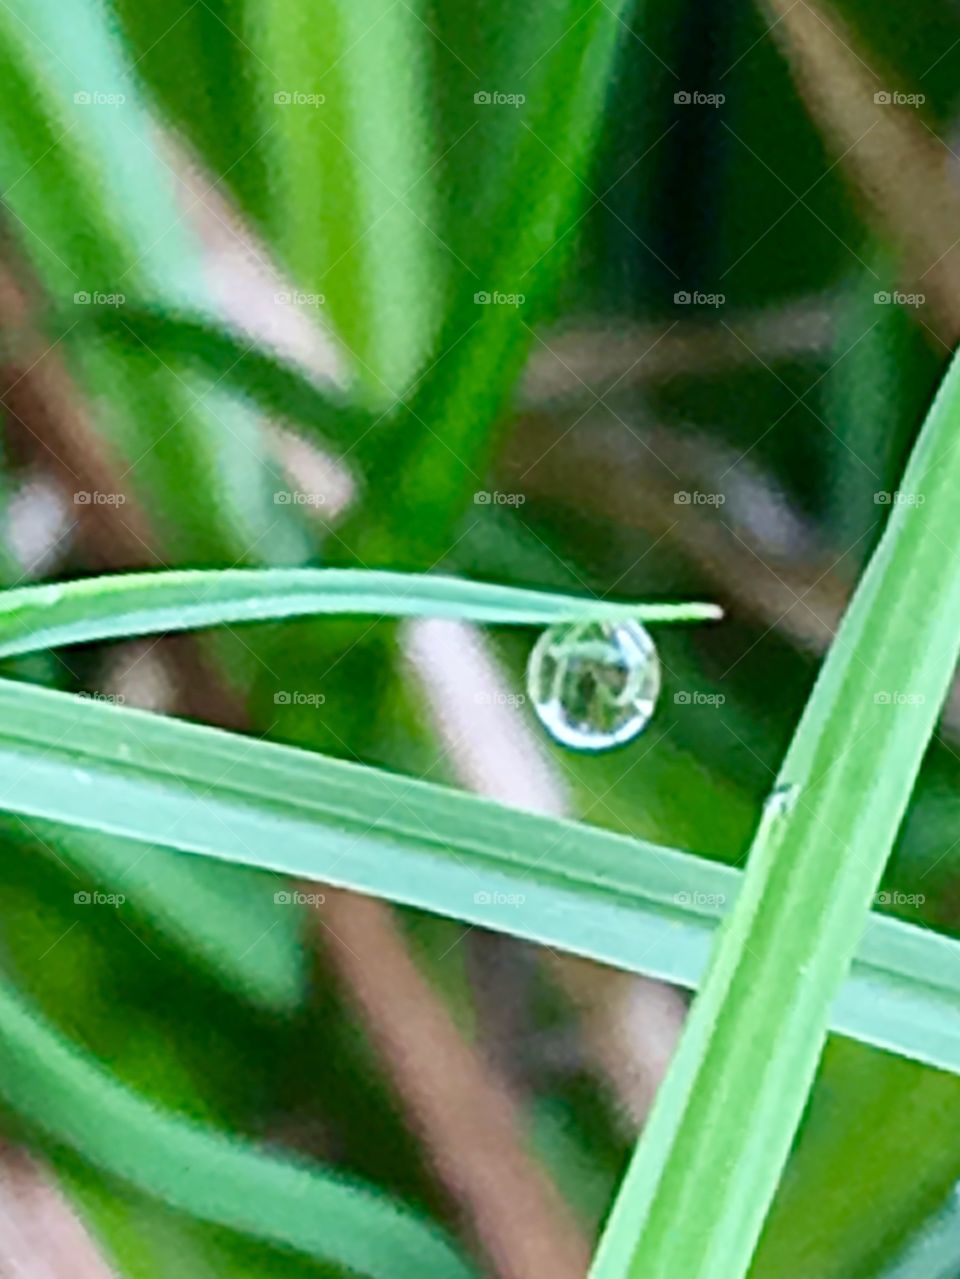 A single drop holding on to the evening 